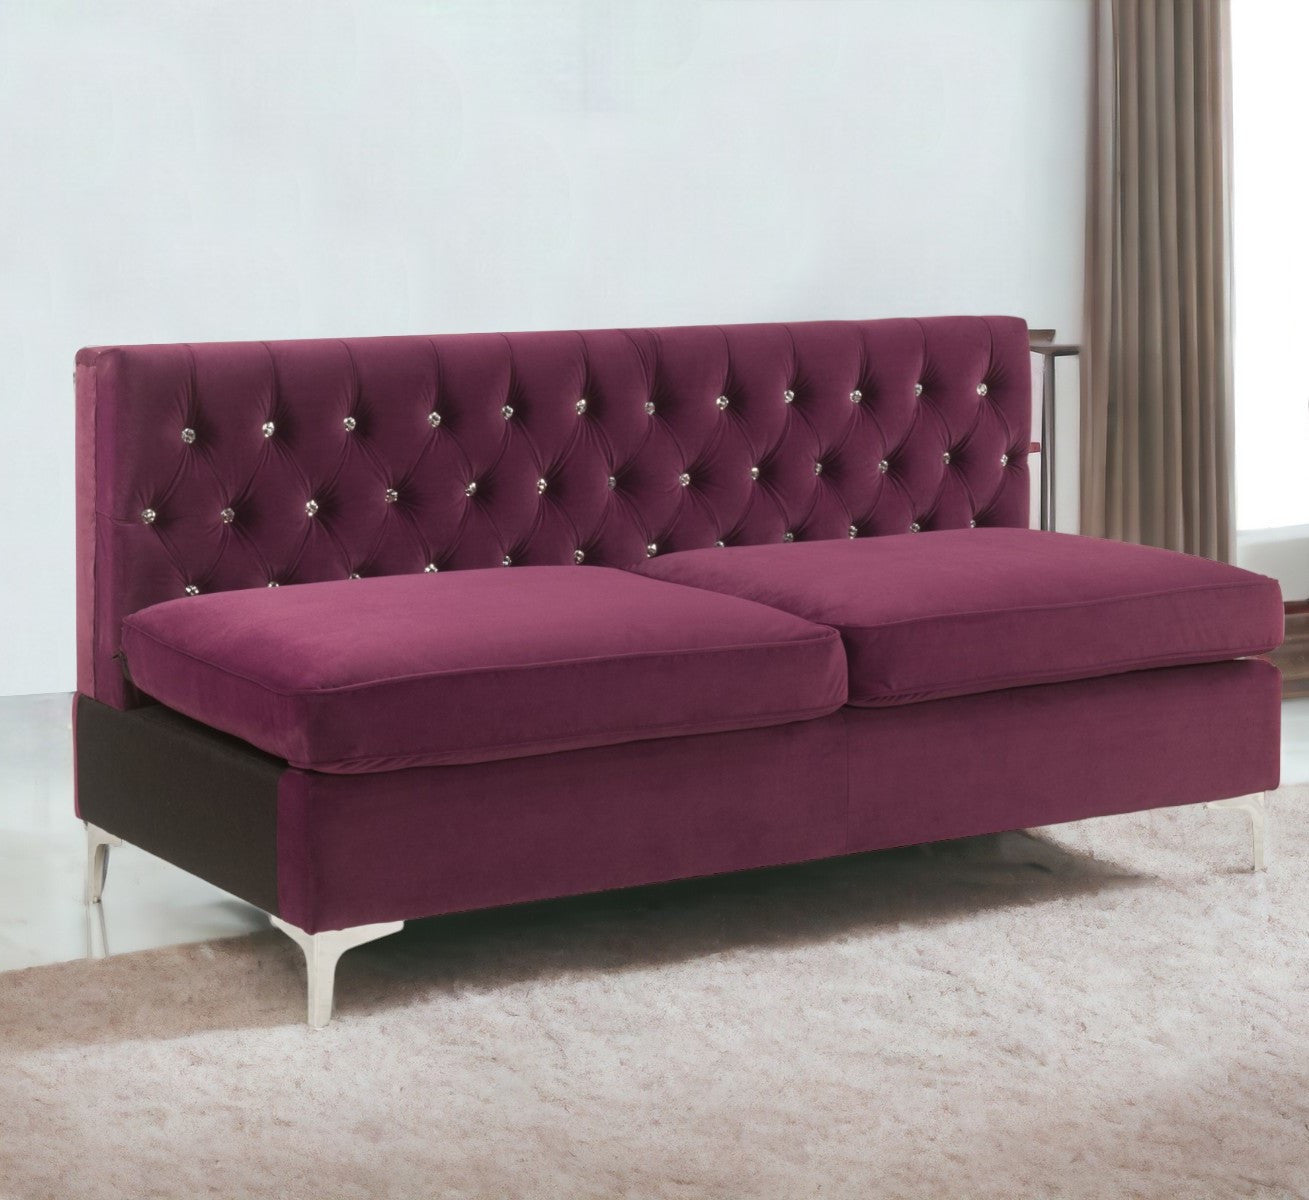 69" Burgundy Velvet And Silver Sofa With Two Toss Pillows